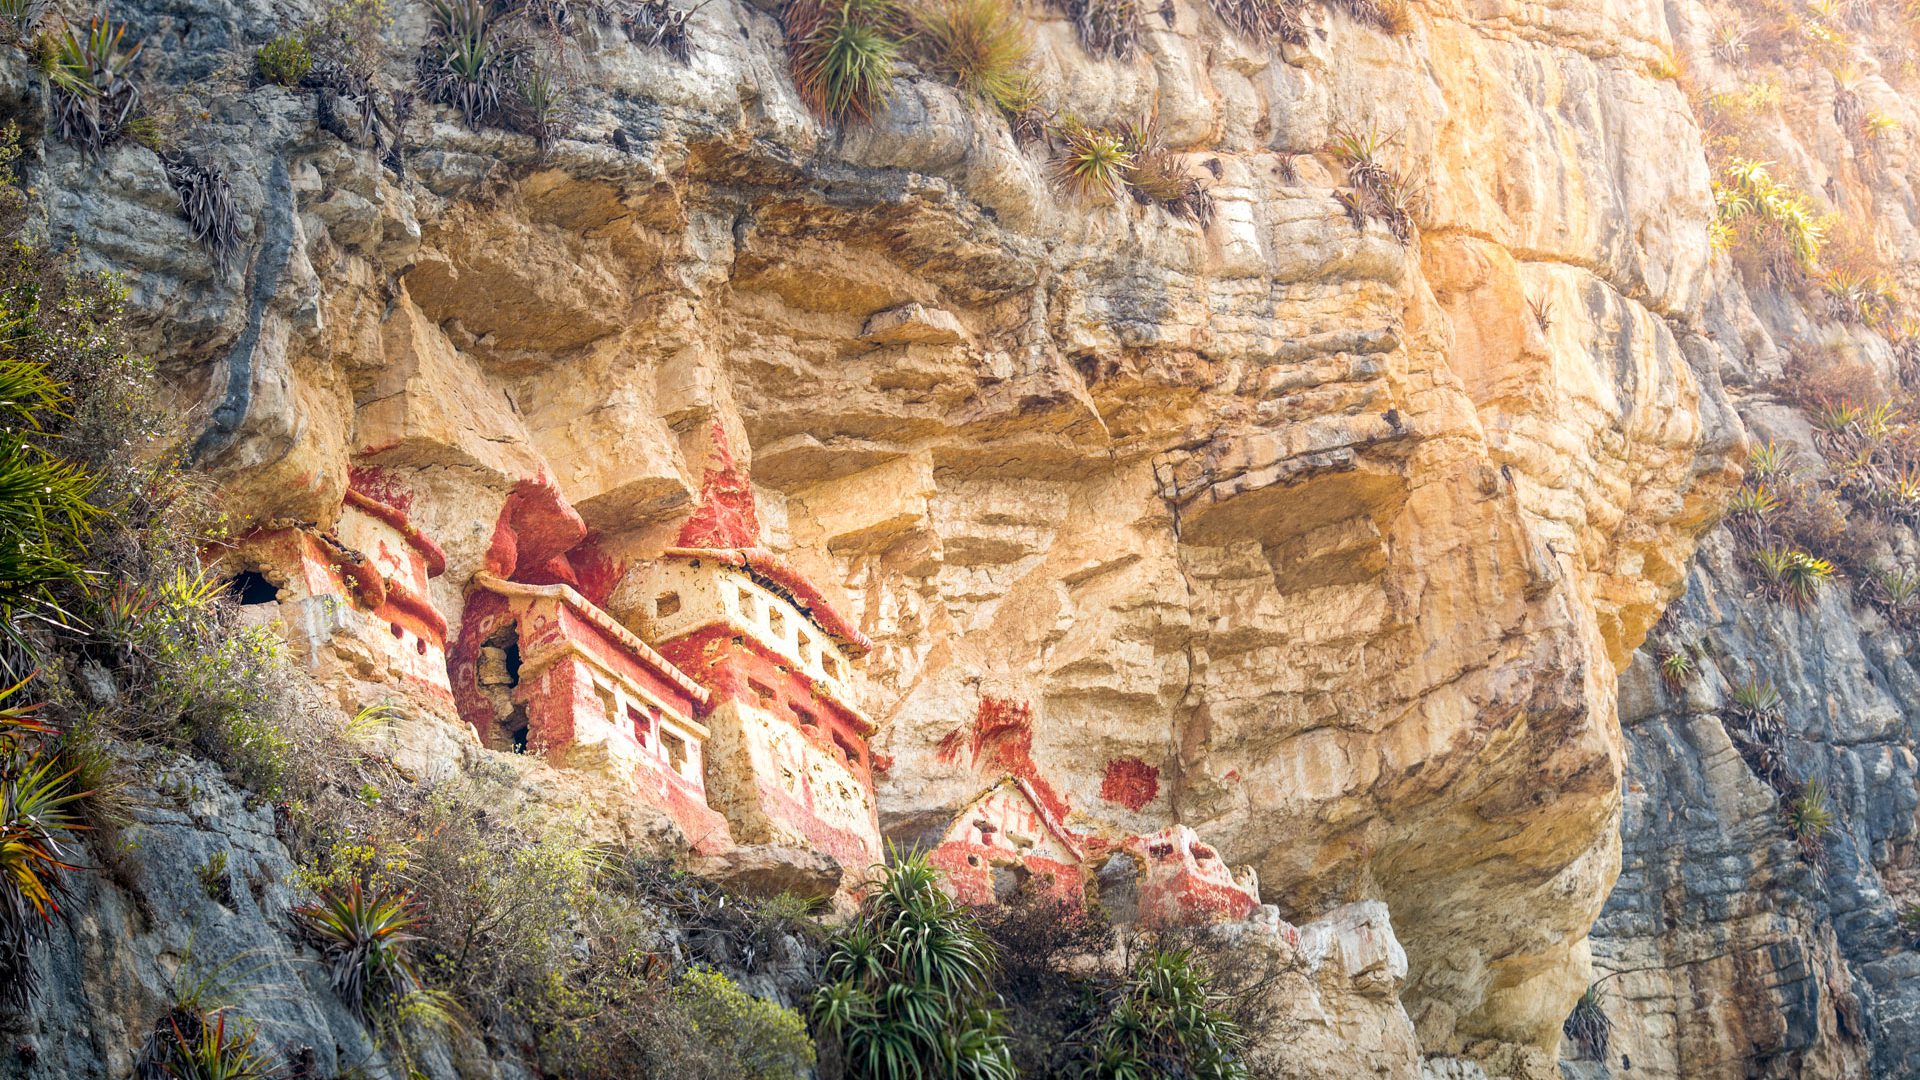 The red-and-ochre Chachapoya funerary precincts in cliffs